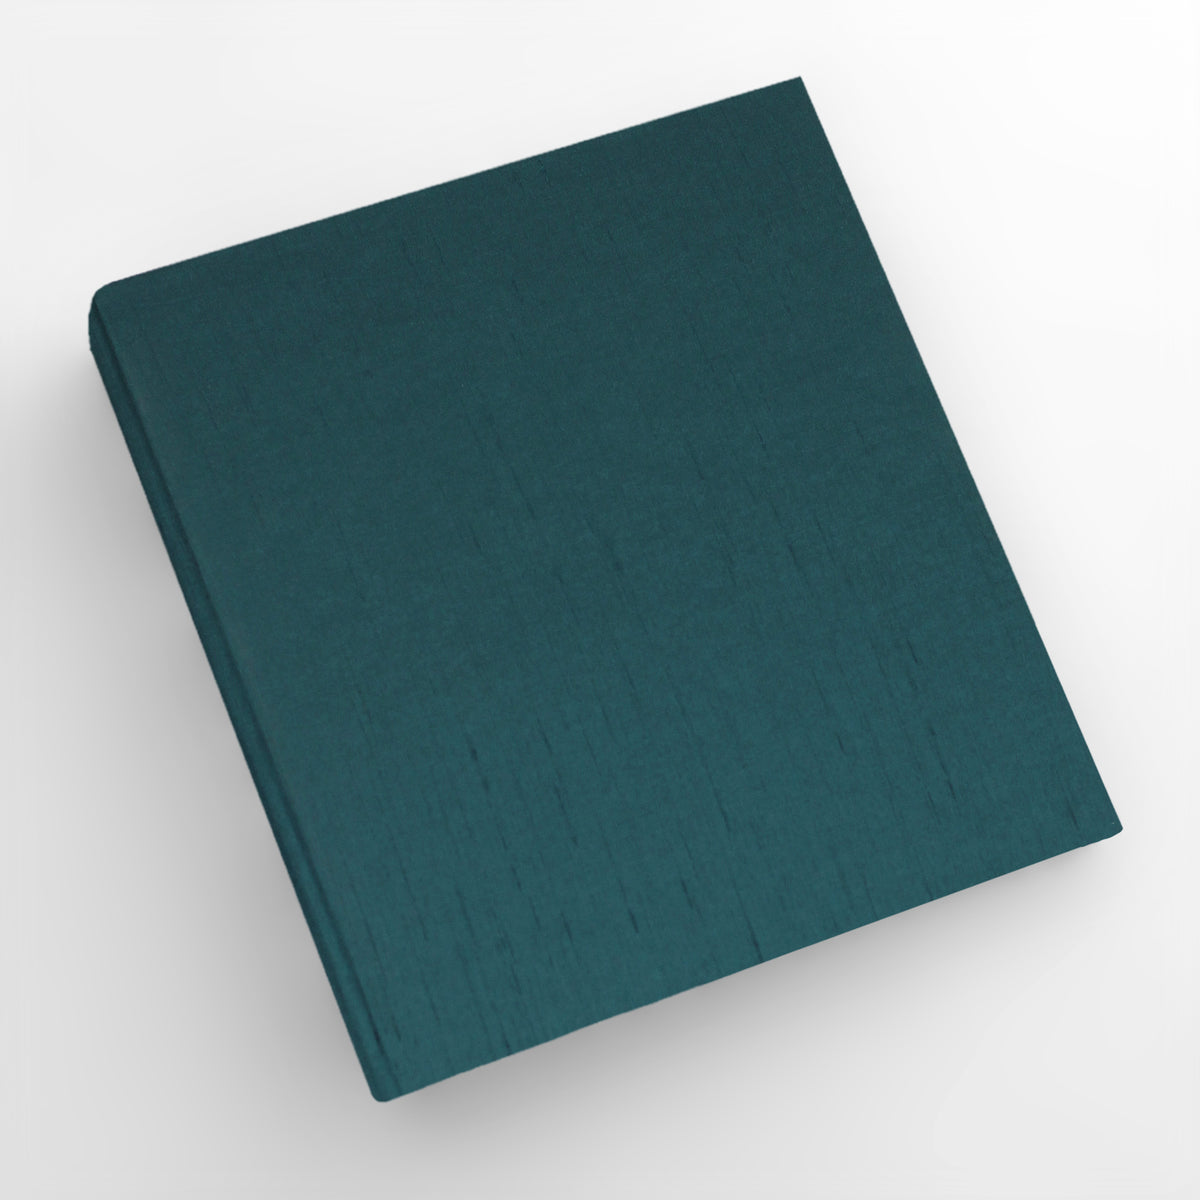 Large Photo Binder For 5x7 Photos | Cover: Teal Blue Silk | Available Personalized